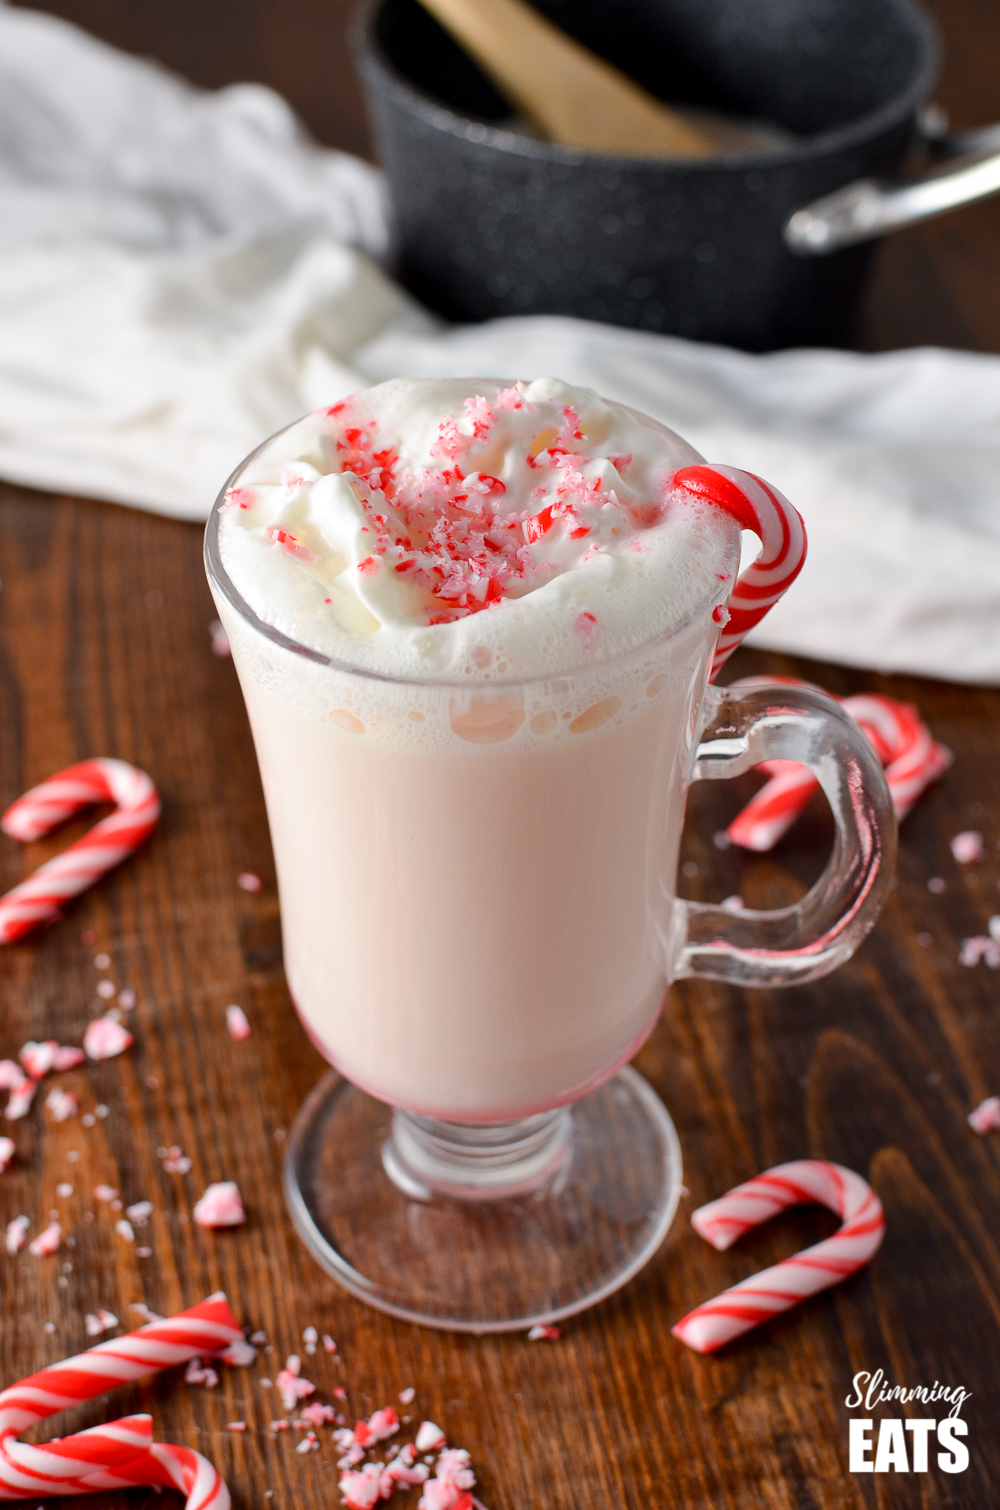 candy cane white hot chocolate in glass mug on wooden board with scattered broken candy cane pieces